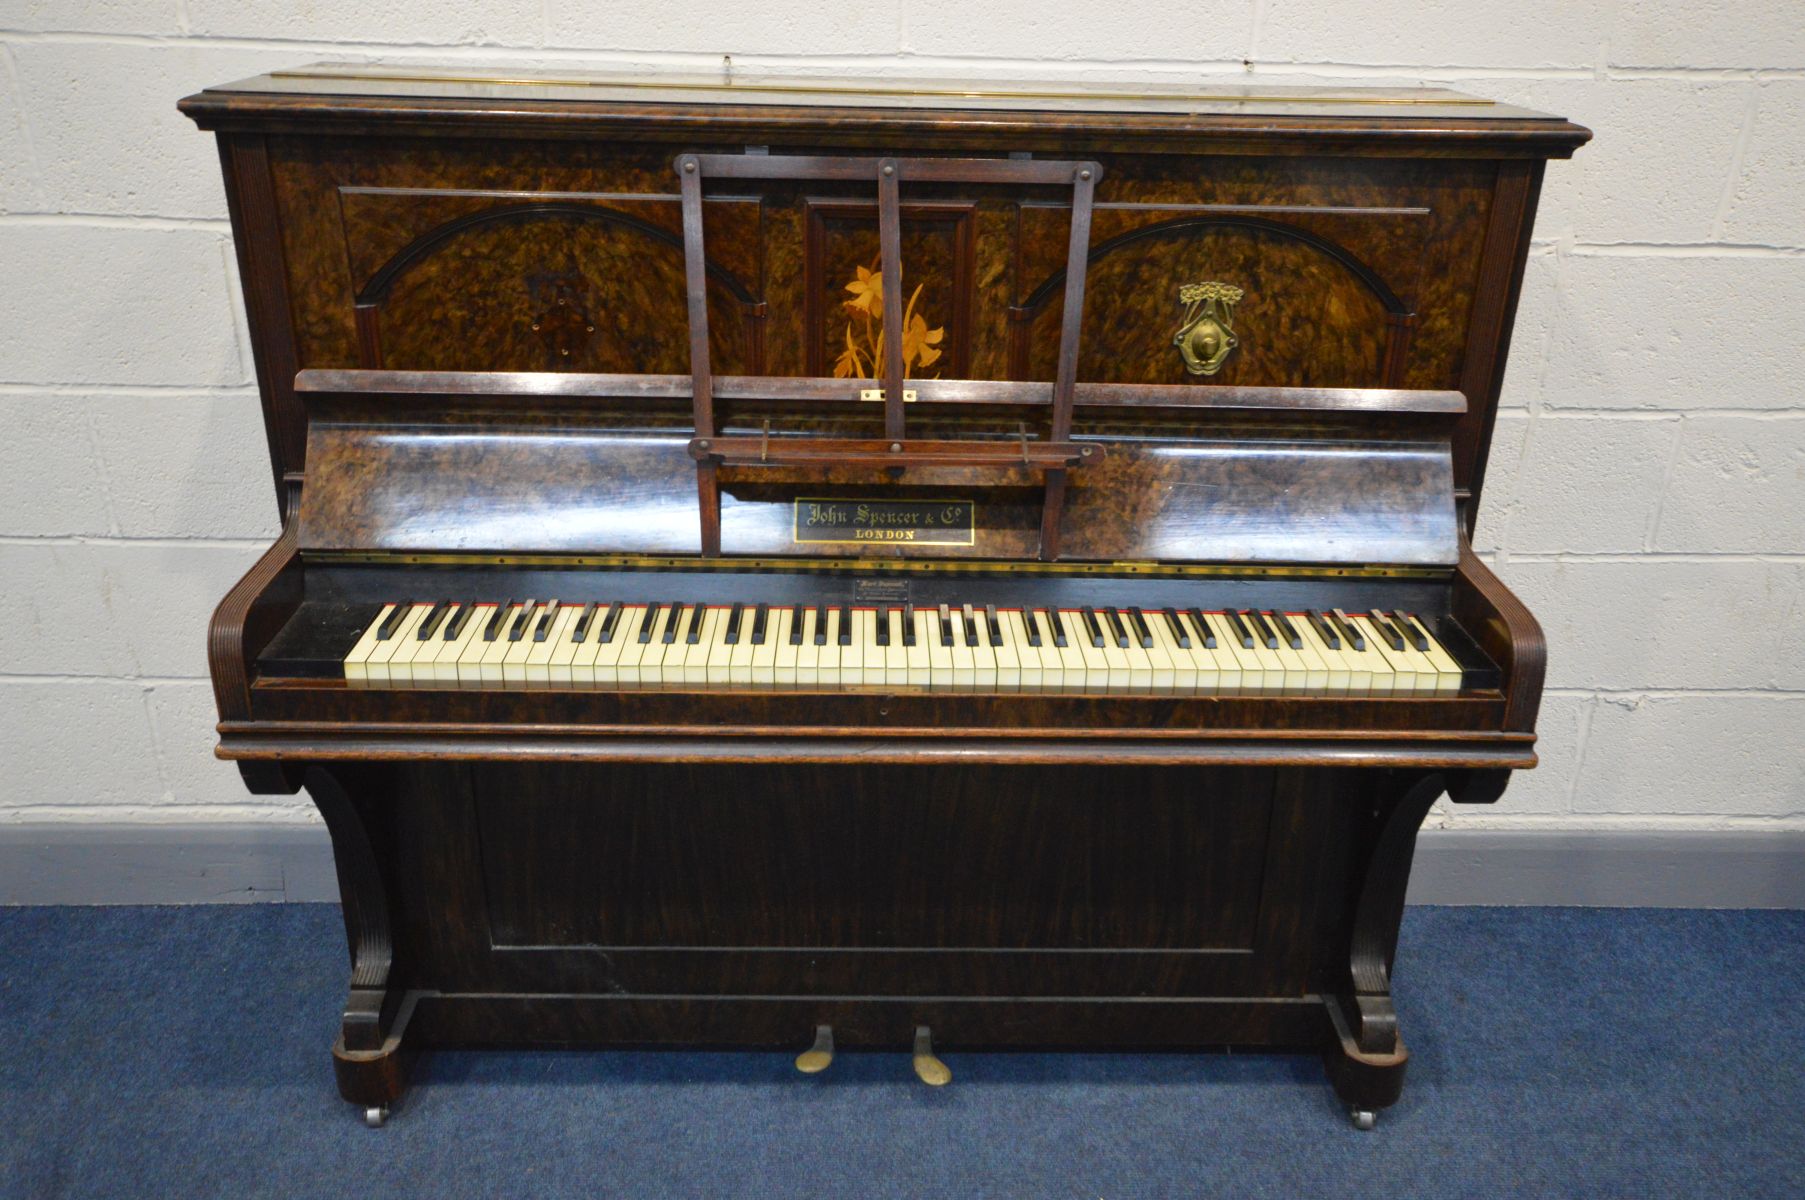 JOHN AND SPENCER & CO, LONDON, an upright overstrung piano, with twin brass candle holders (loose